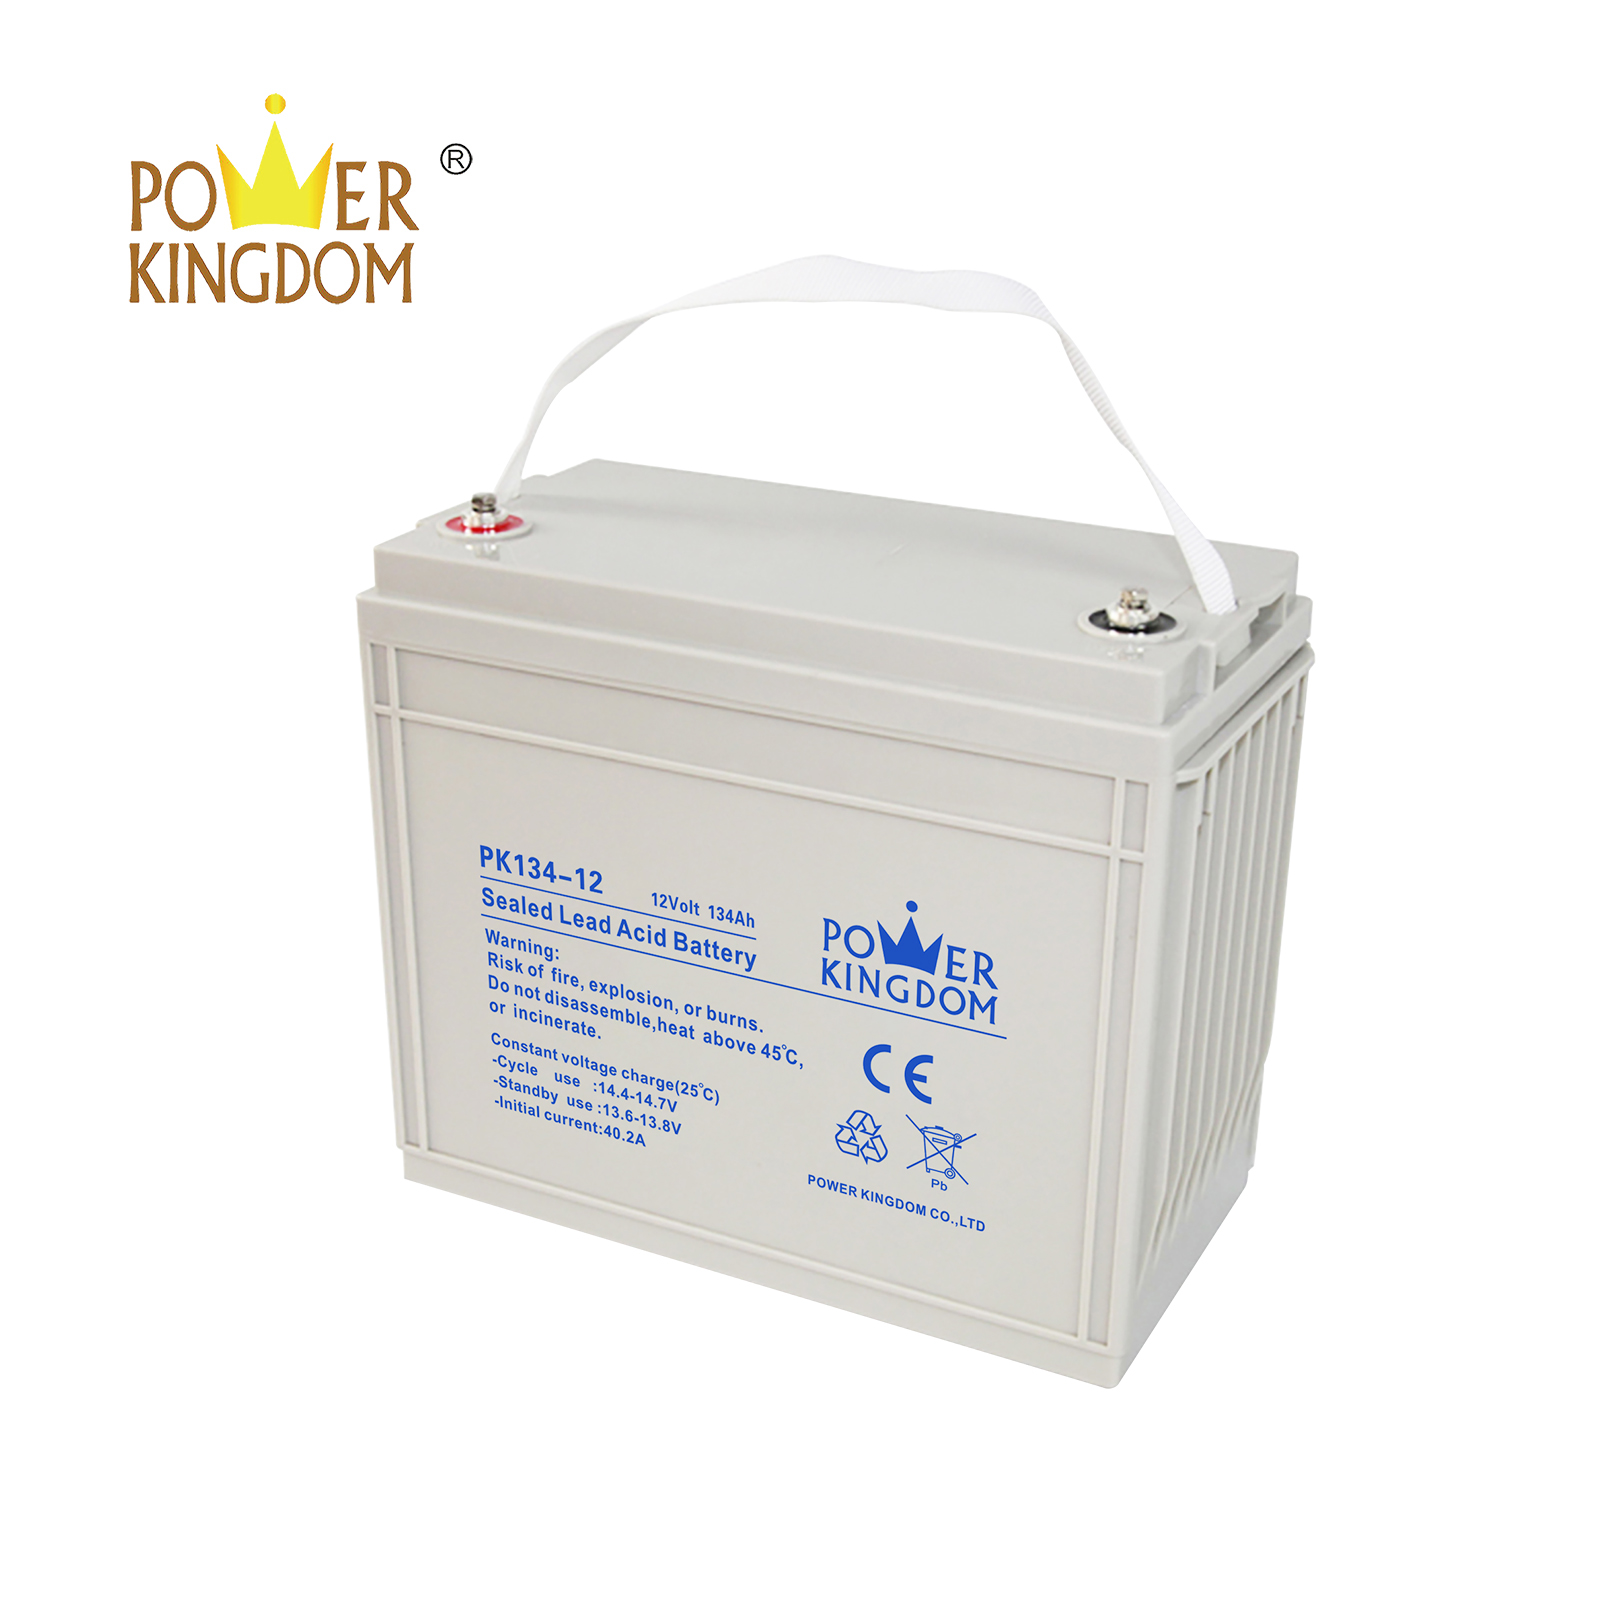 12 volt deep cycle battery for mobility scooter